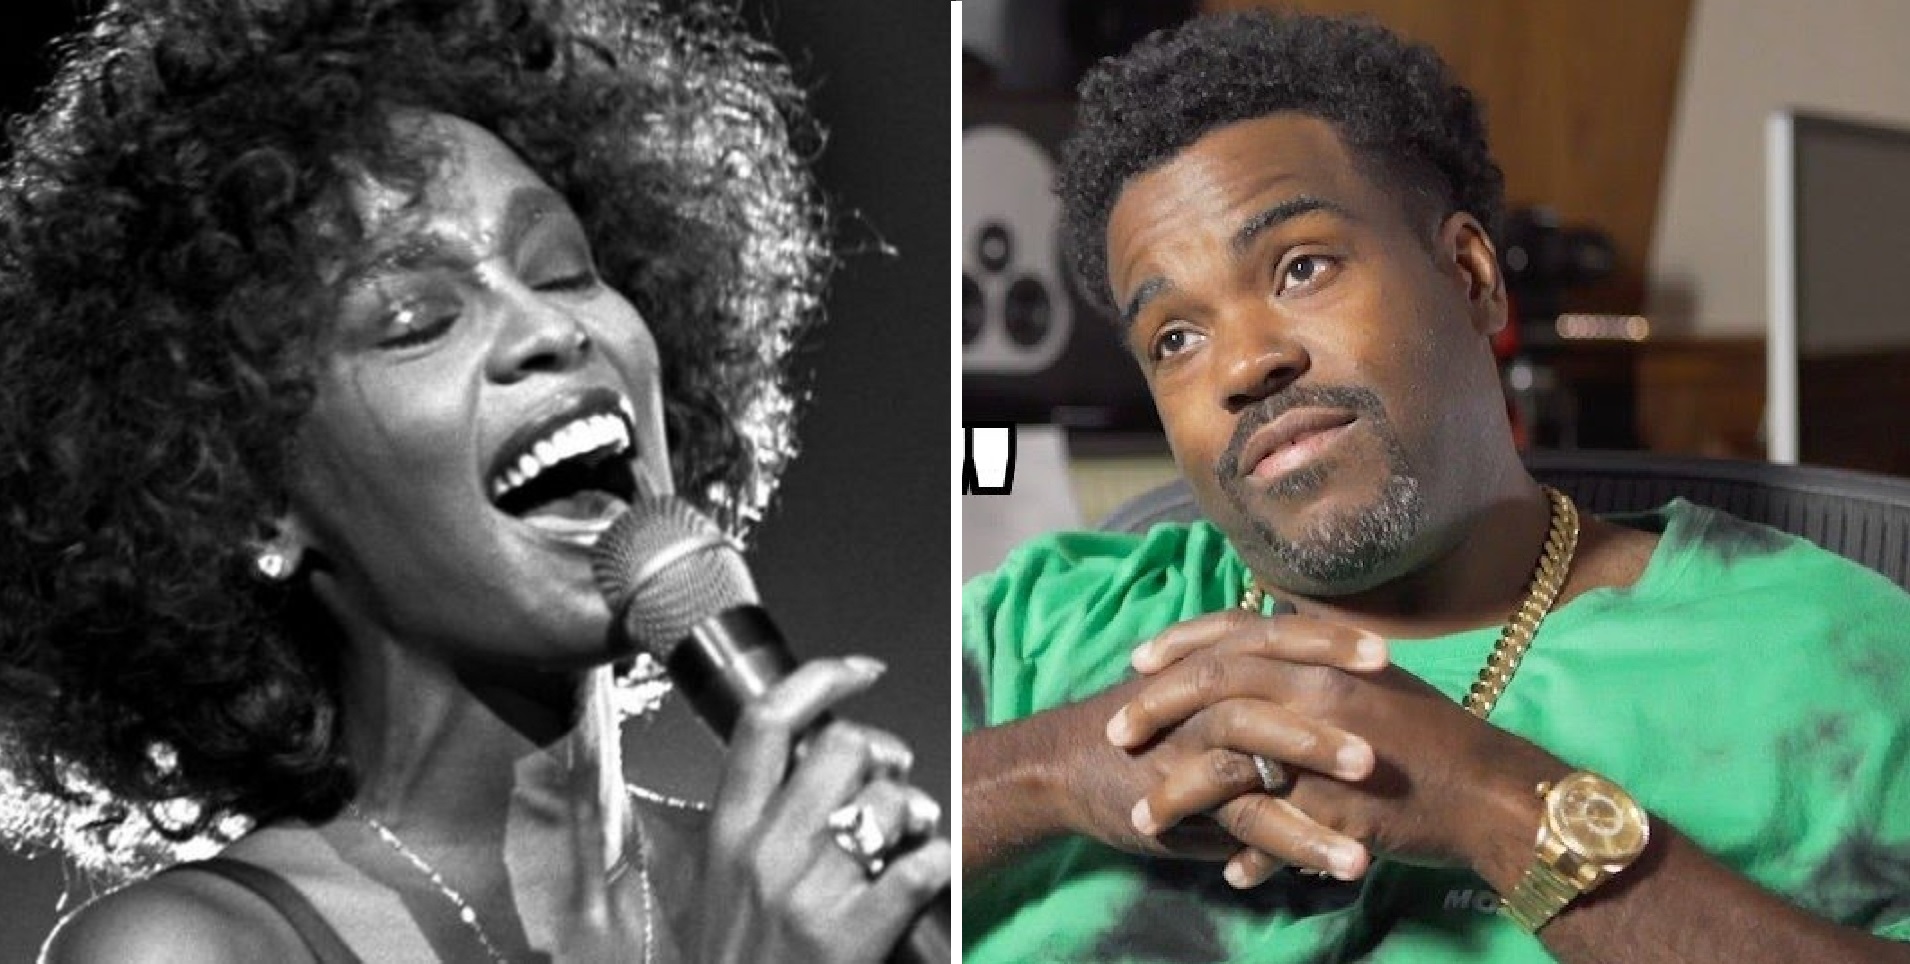 Darkchild Explains Why Whitney Houston is the ‘Greatest’ & Why He Believes She’s a League Above Mariah and Others